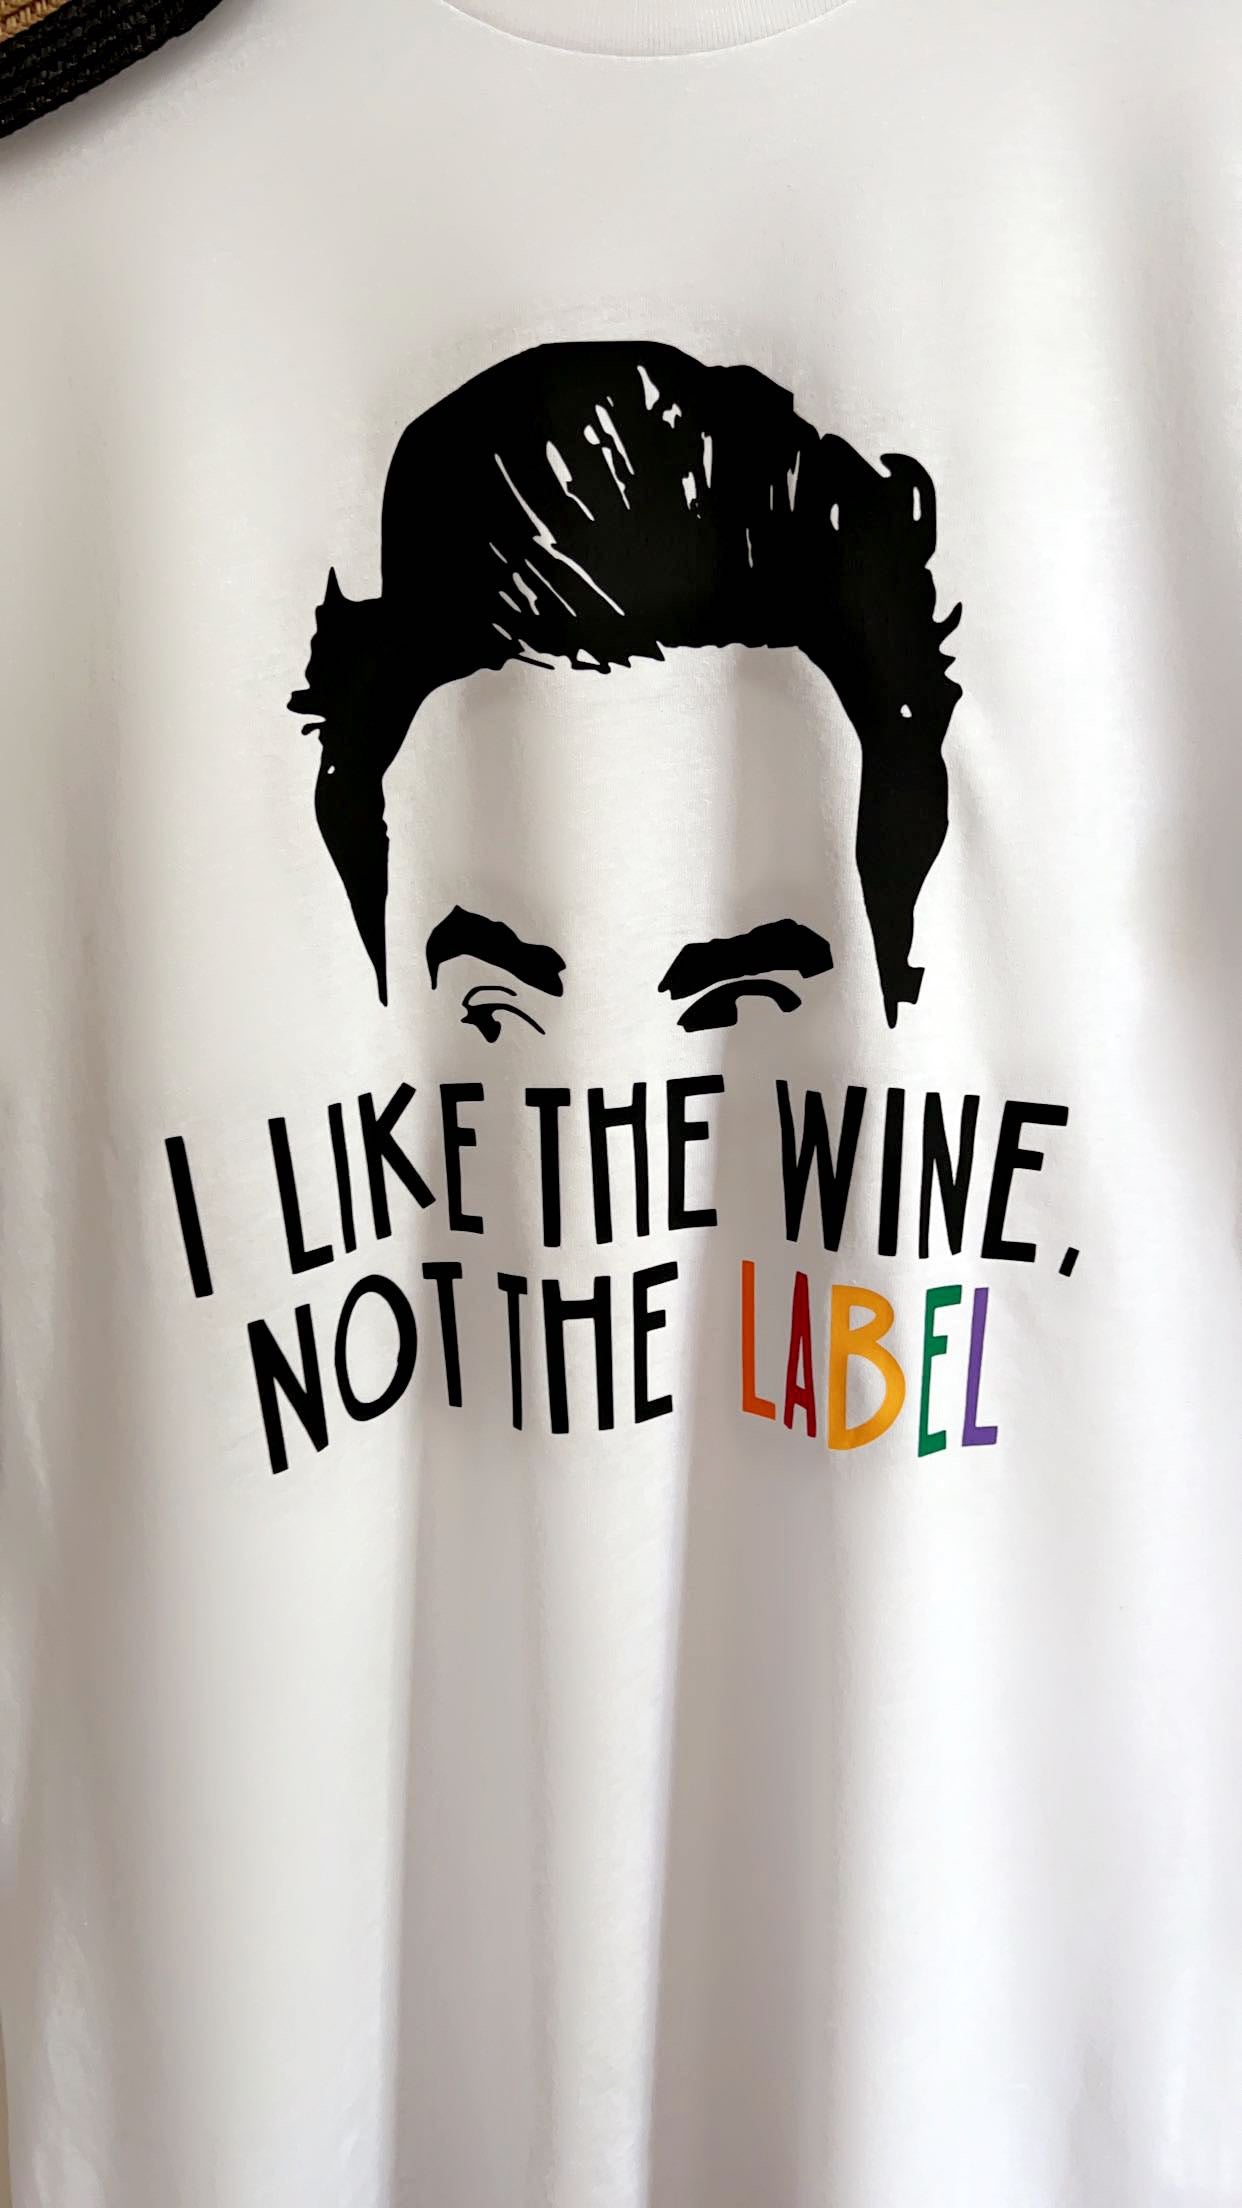 David Rose “I Like the Wine, Not the Label” Tee